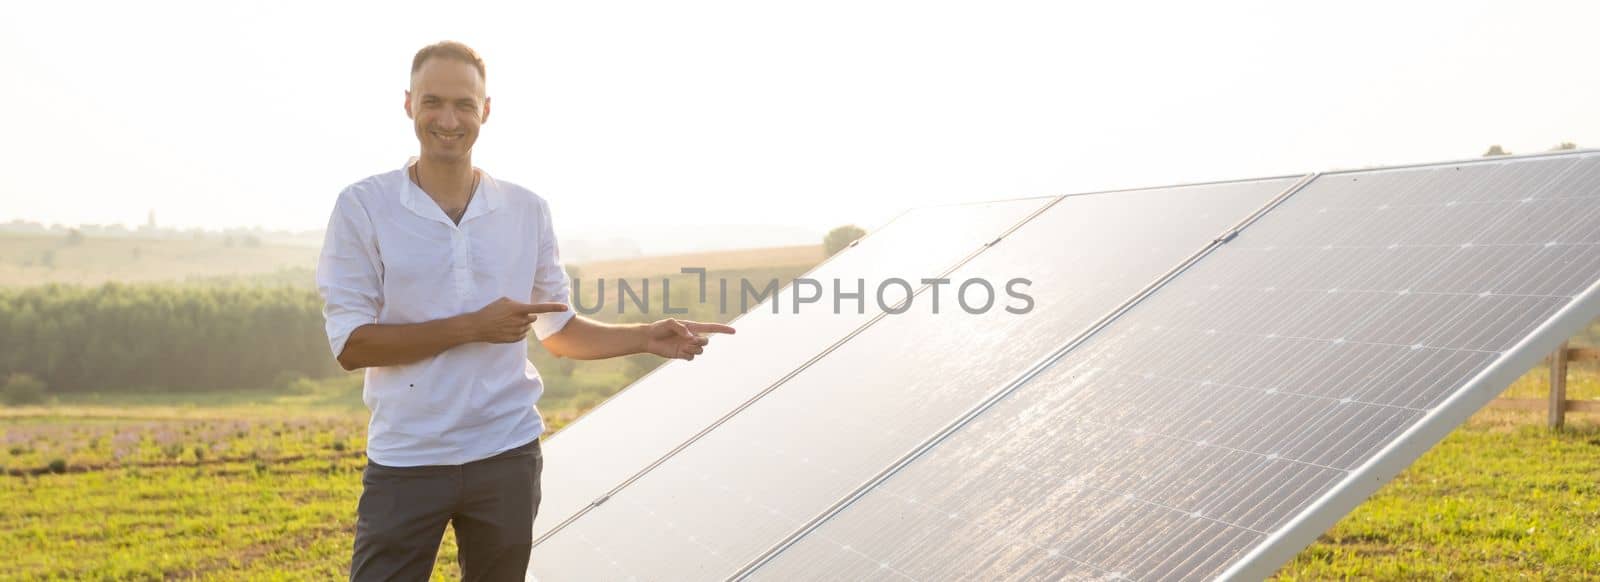 Solar panel on blue sky background. Green grass and cloudy sky. Alternative energy concept.